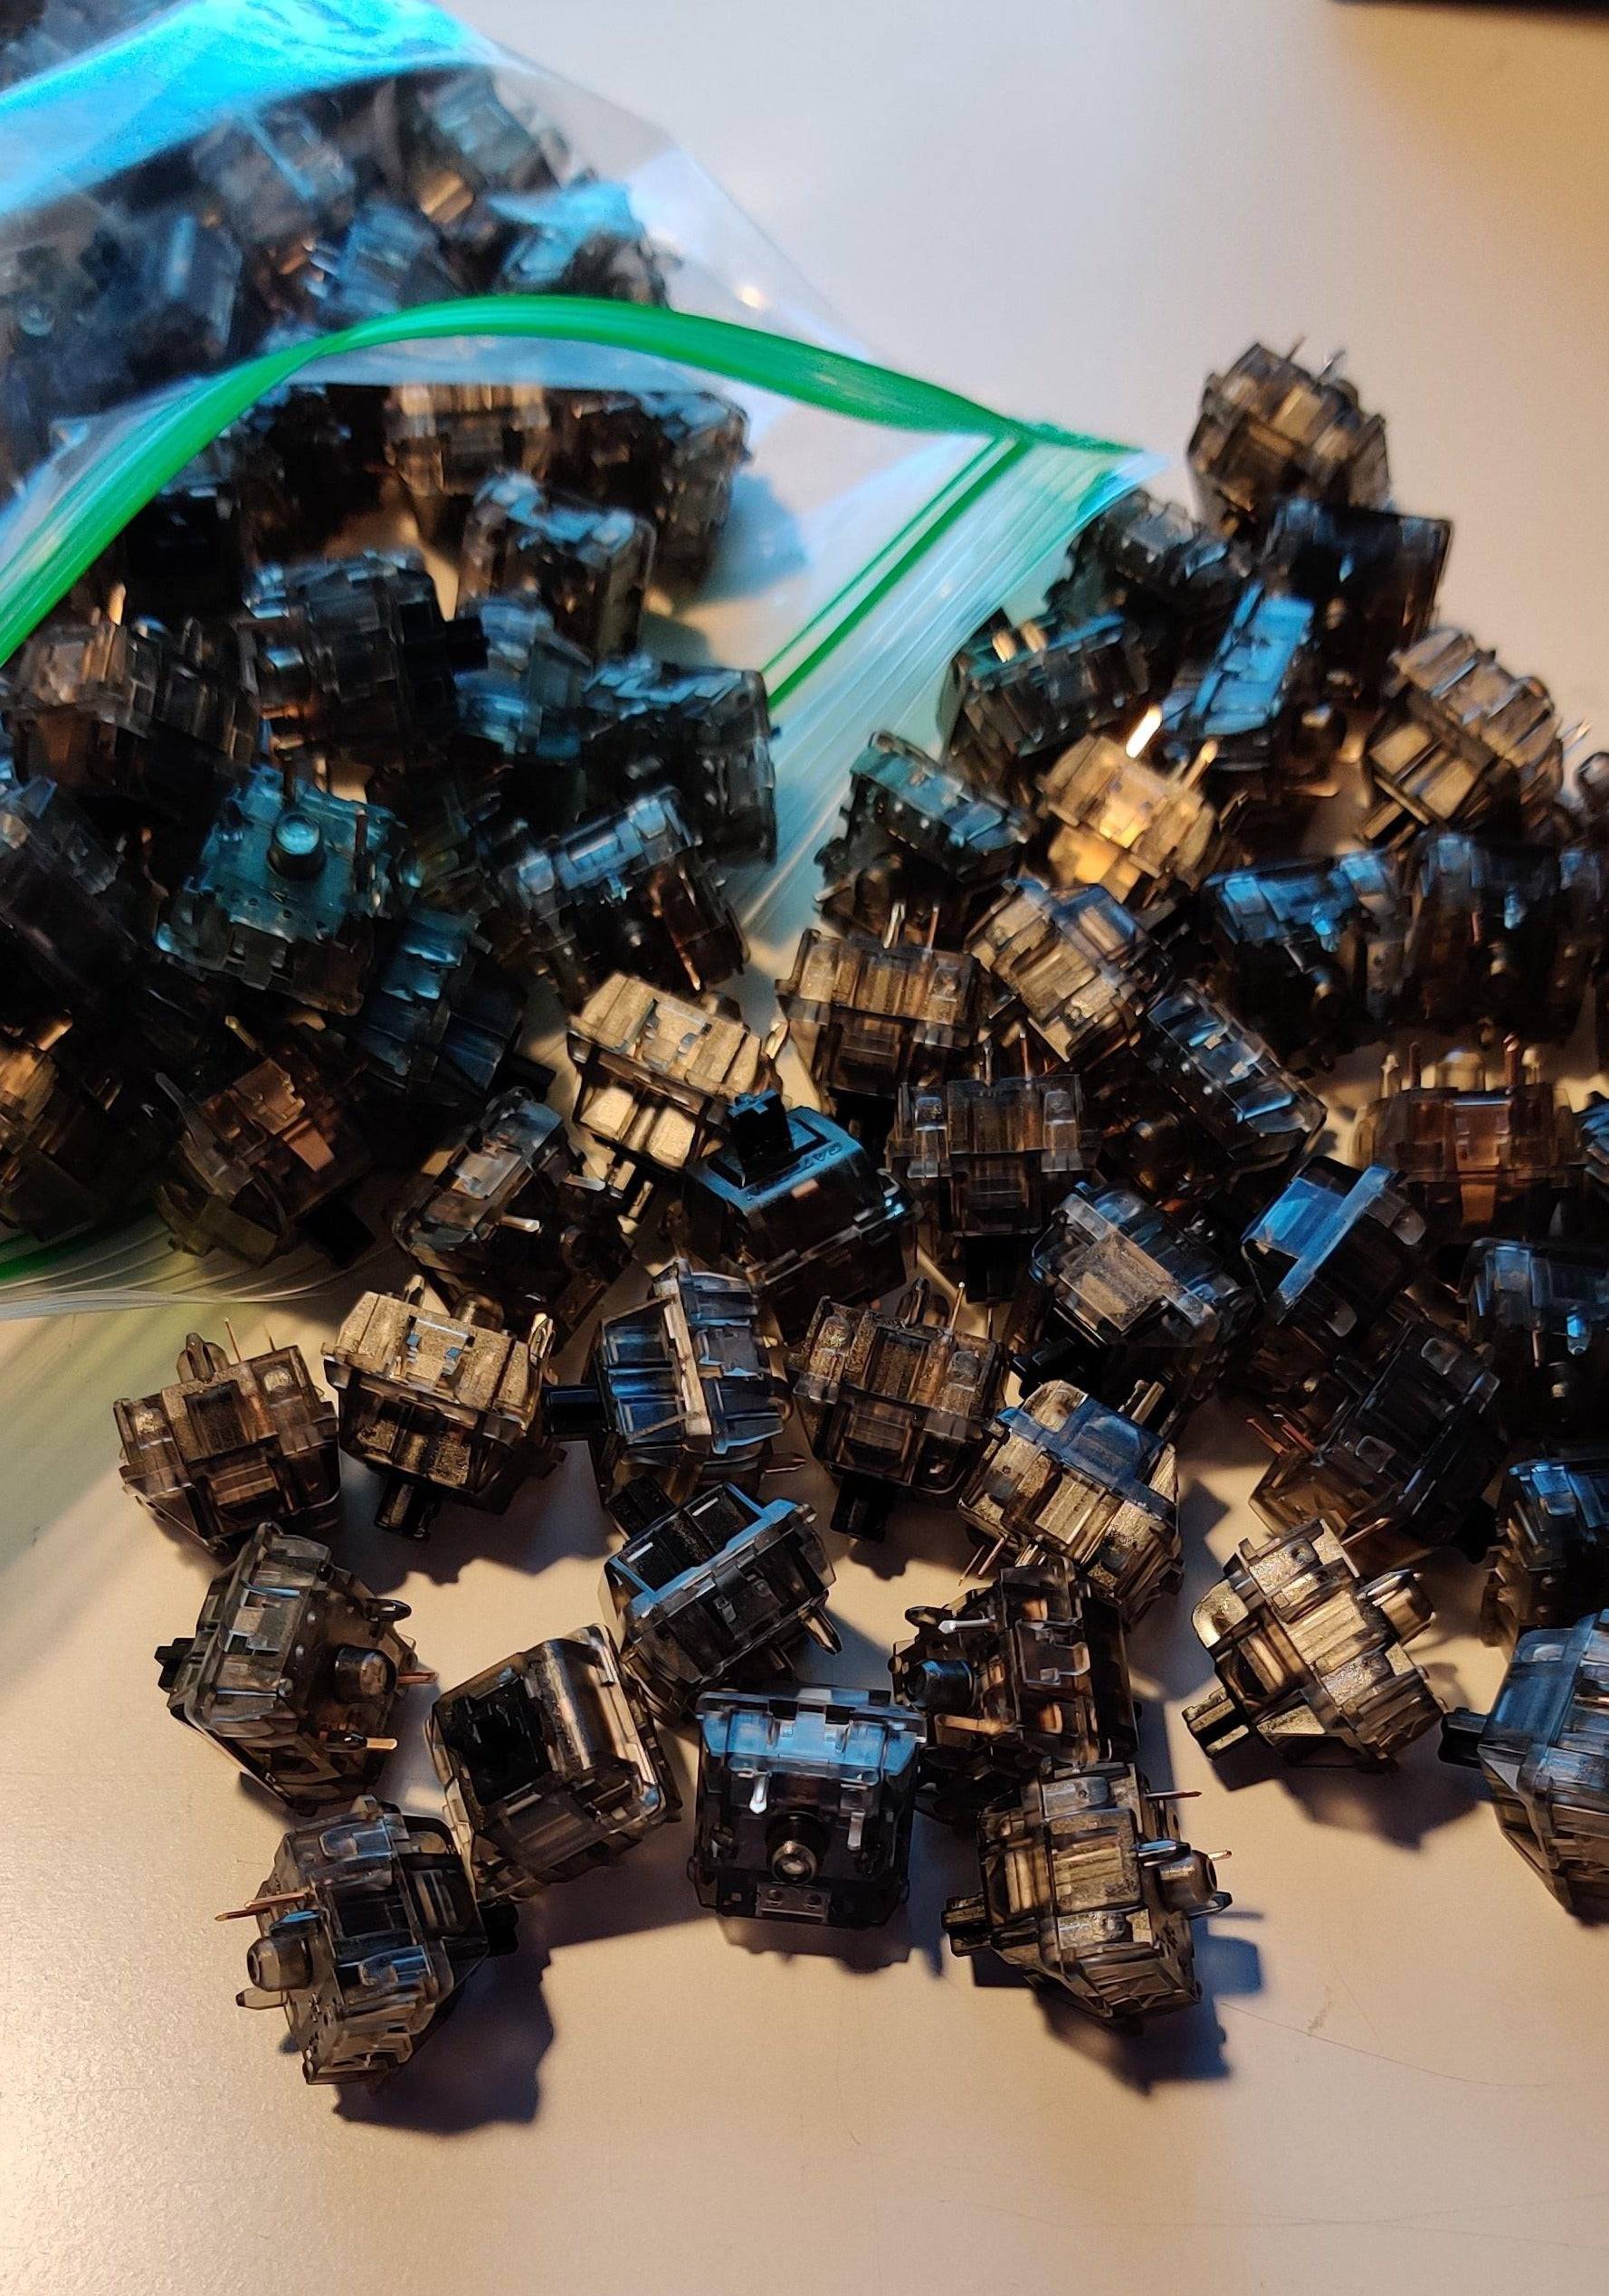 [KFA MARKETPLACE] eighty-eight stock gateron ink v2 blacks, plus 12 lubed of the same - KeebsForAll